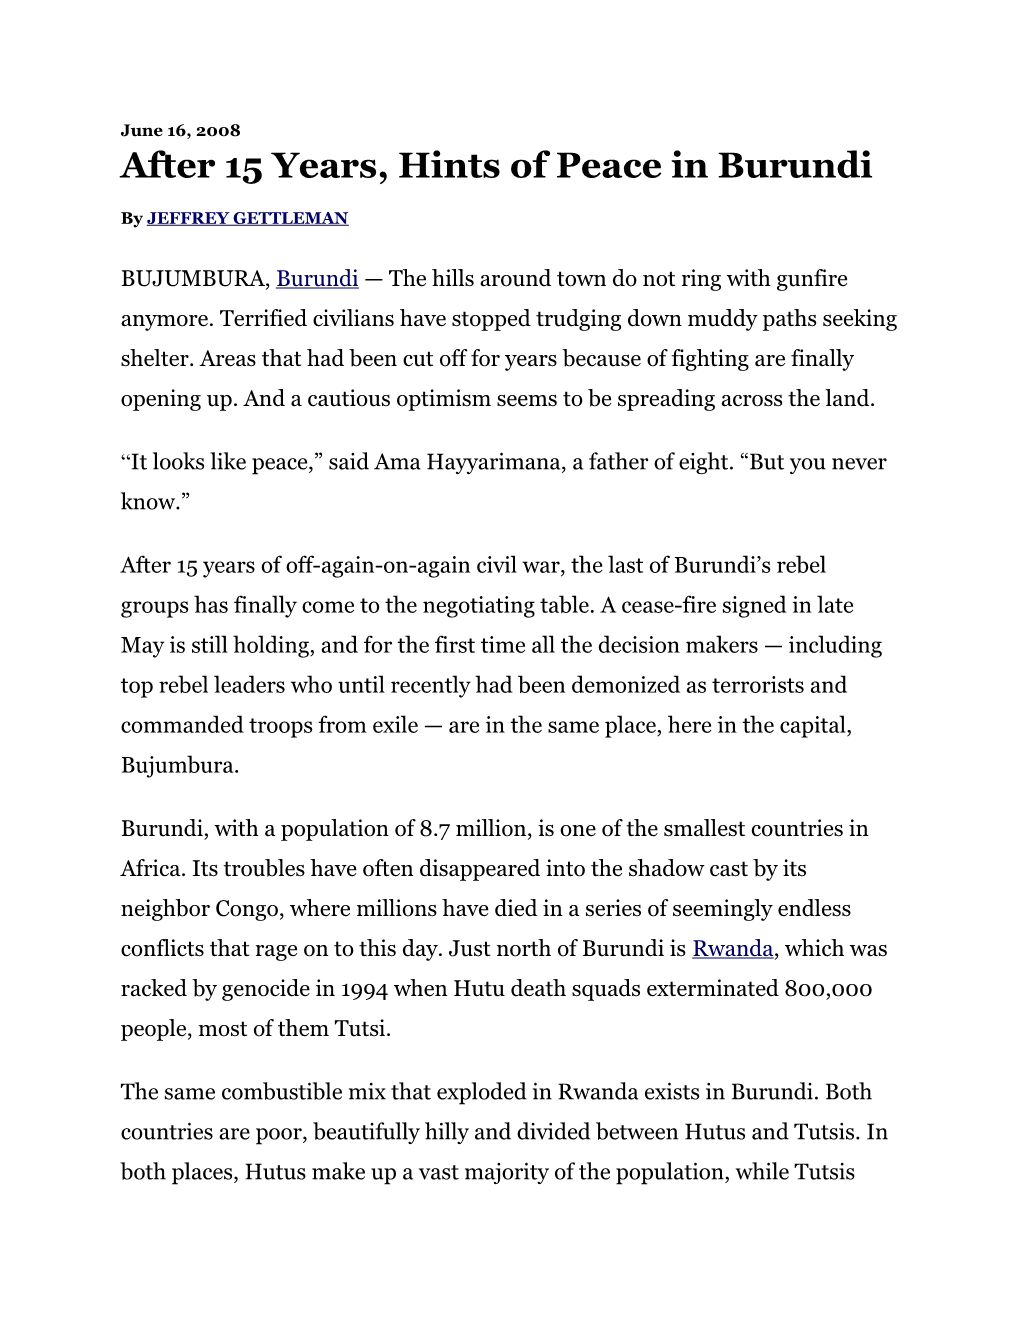 After 15 Years, Hints of Peace in Burundi